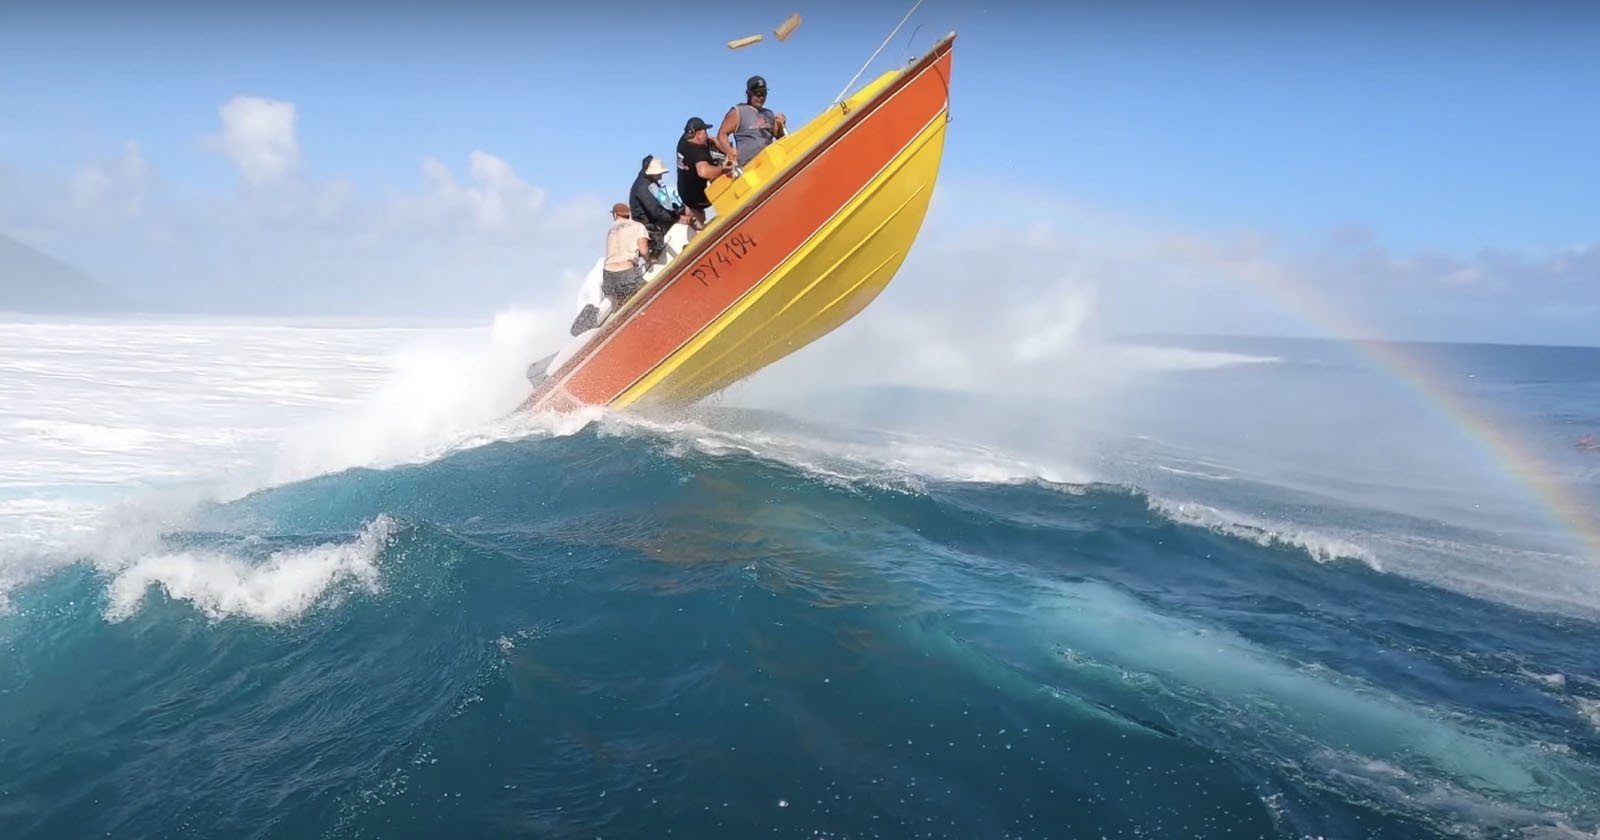  video shows two photographers thrown airborne giant wave 